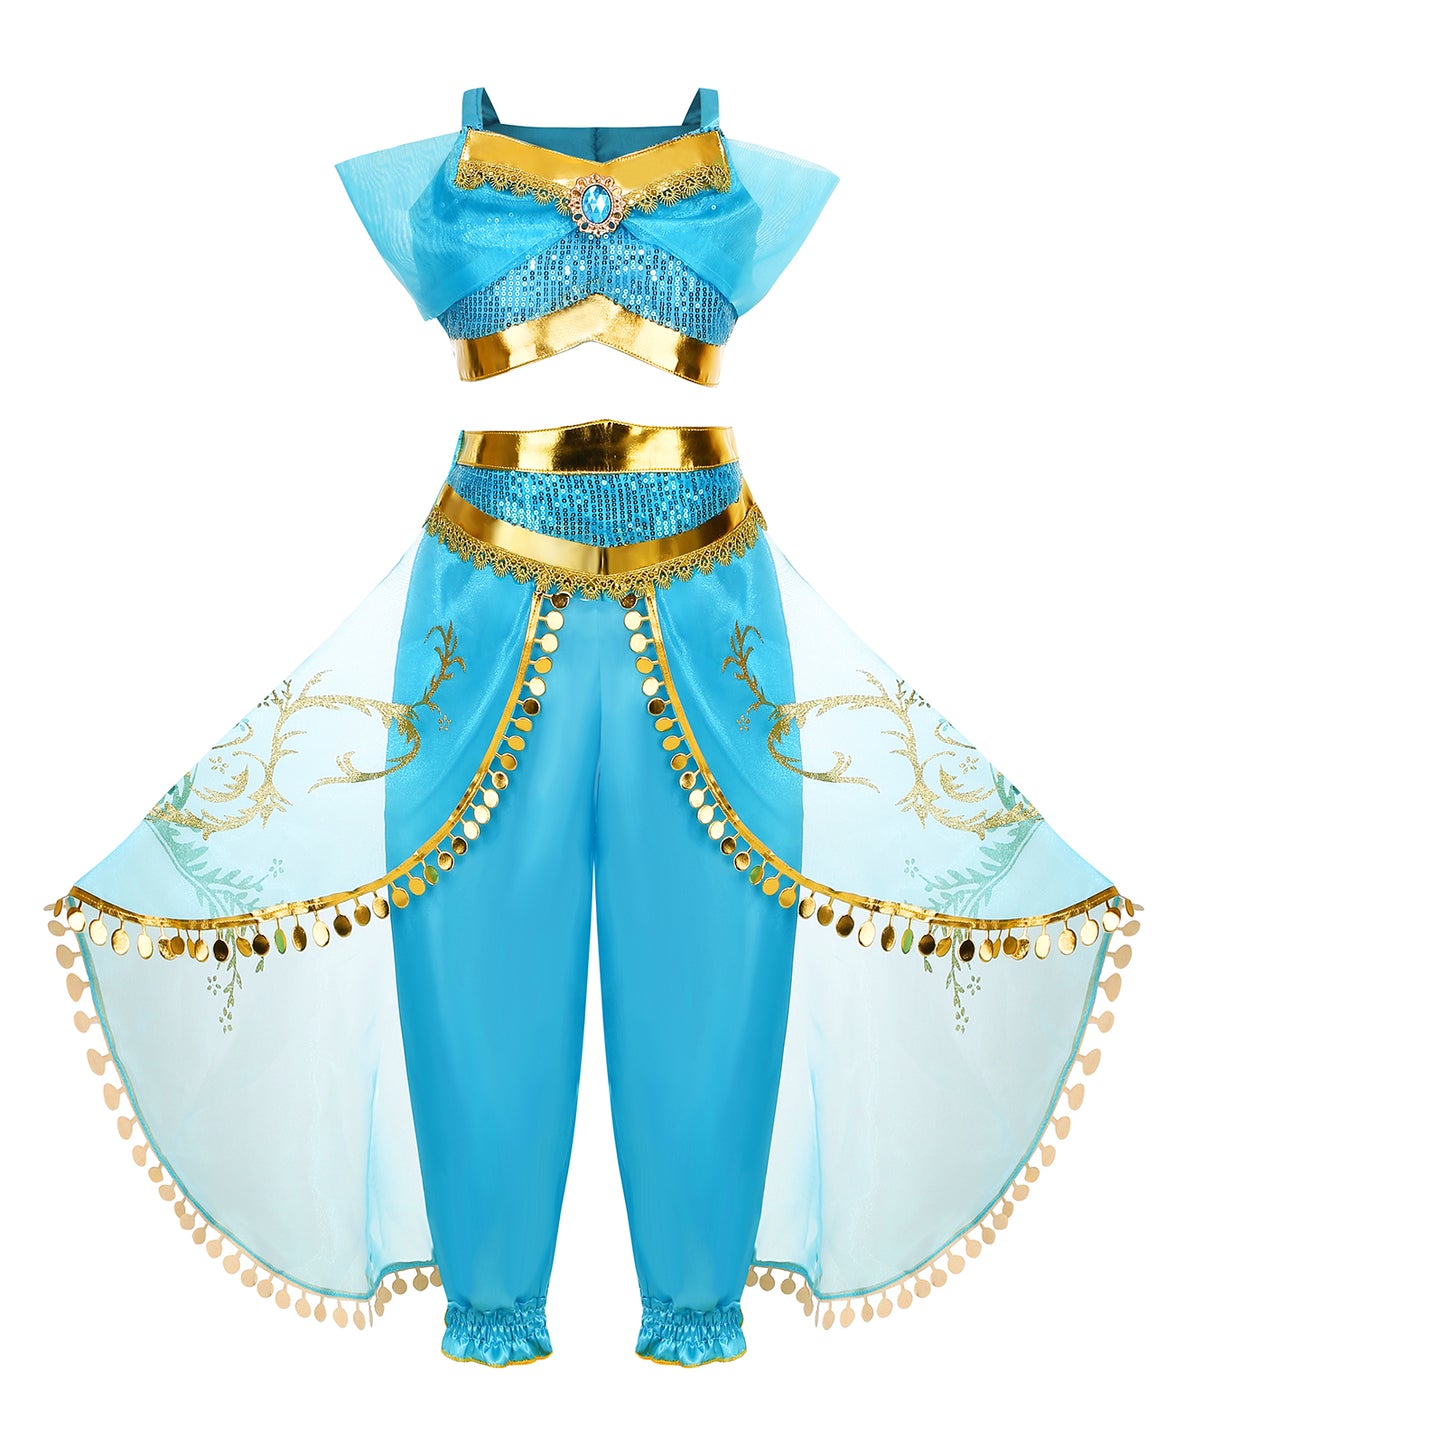 Foierp Costume for Kids - Princess Dress Up Girls Christmas Halloween Cosplay Party Outfits